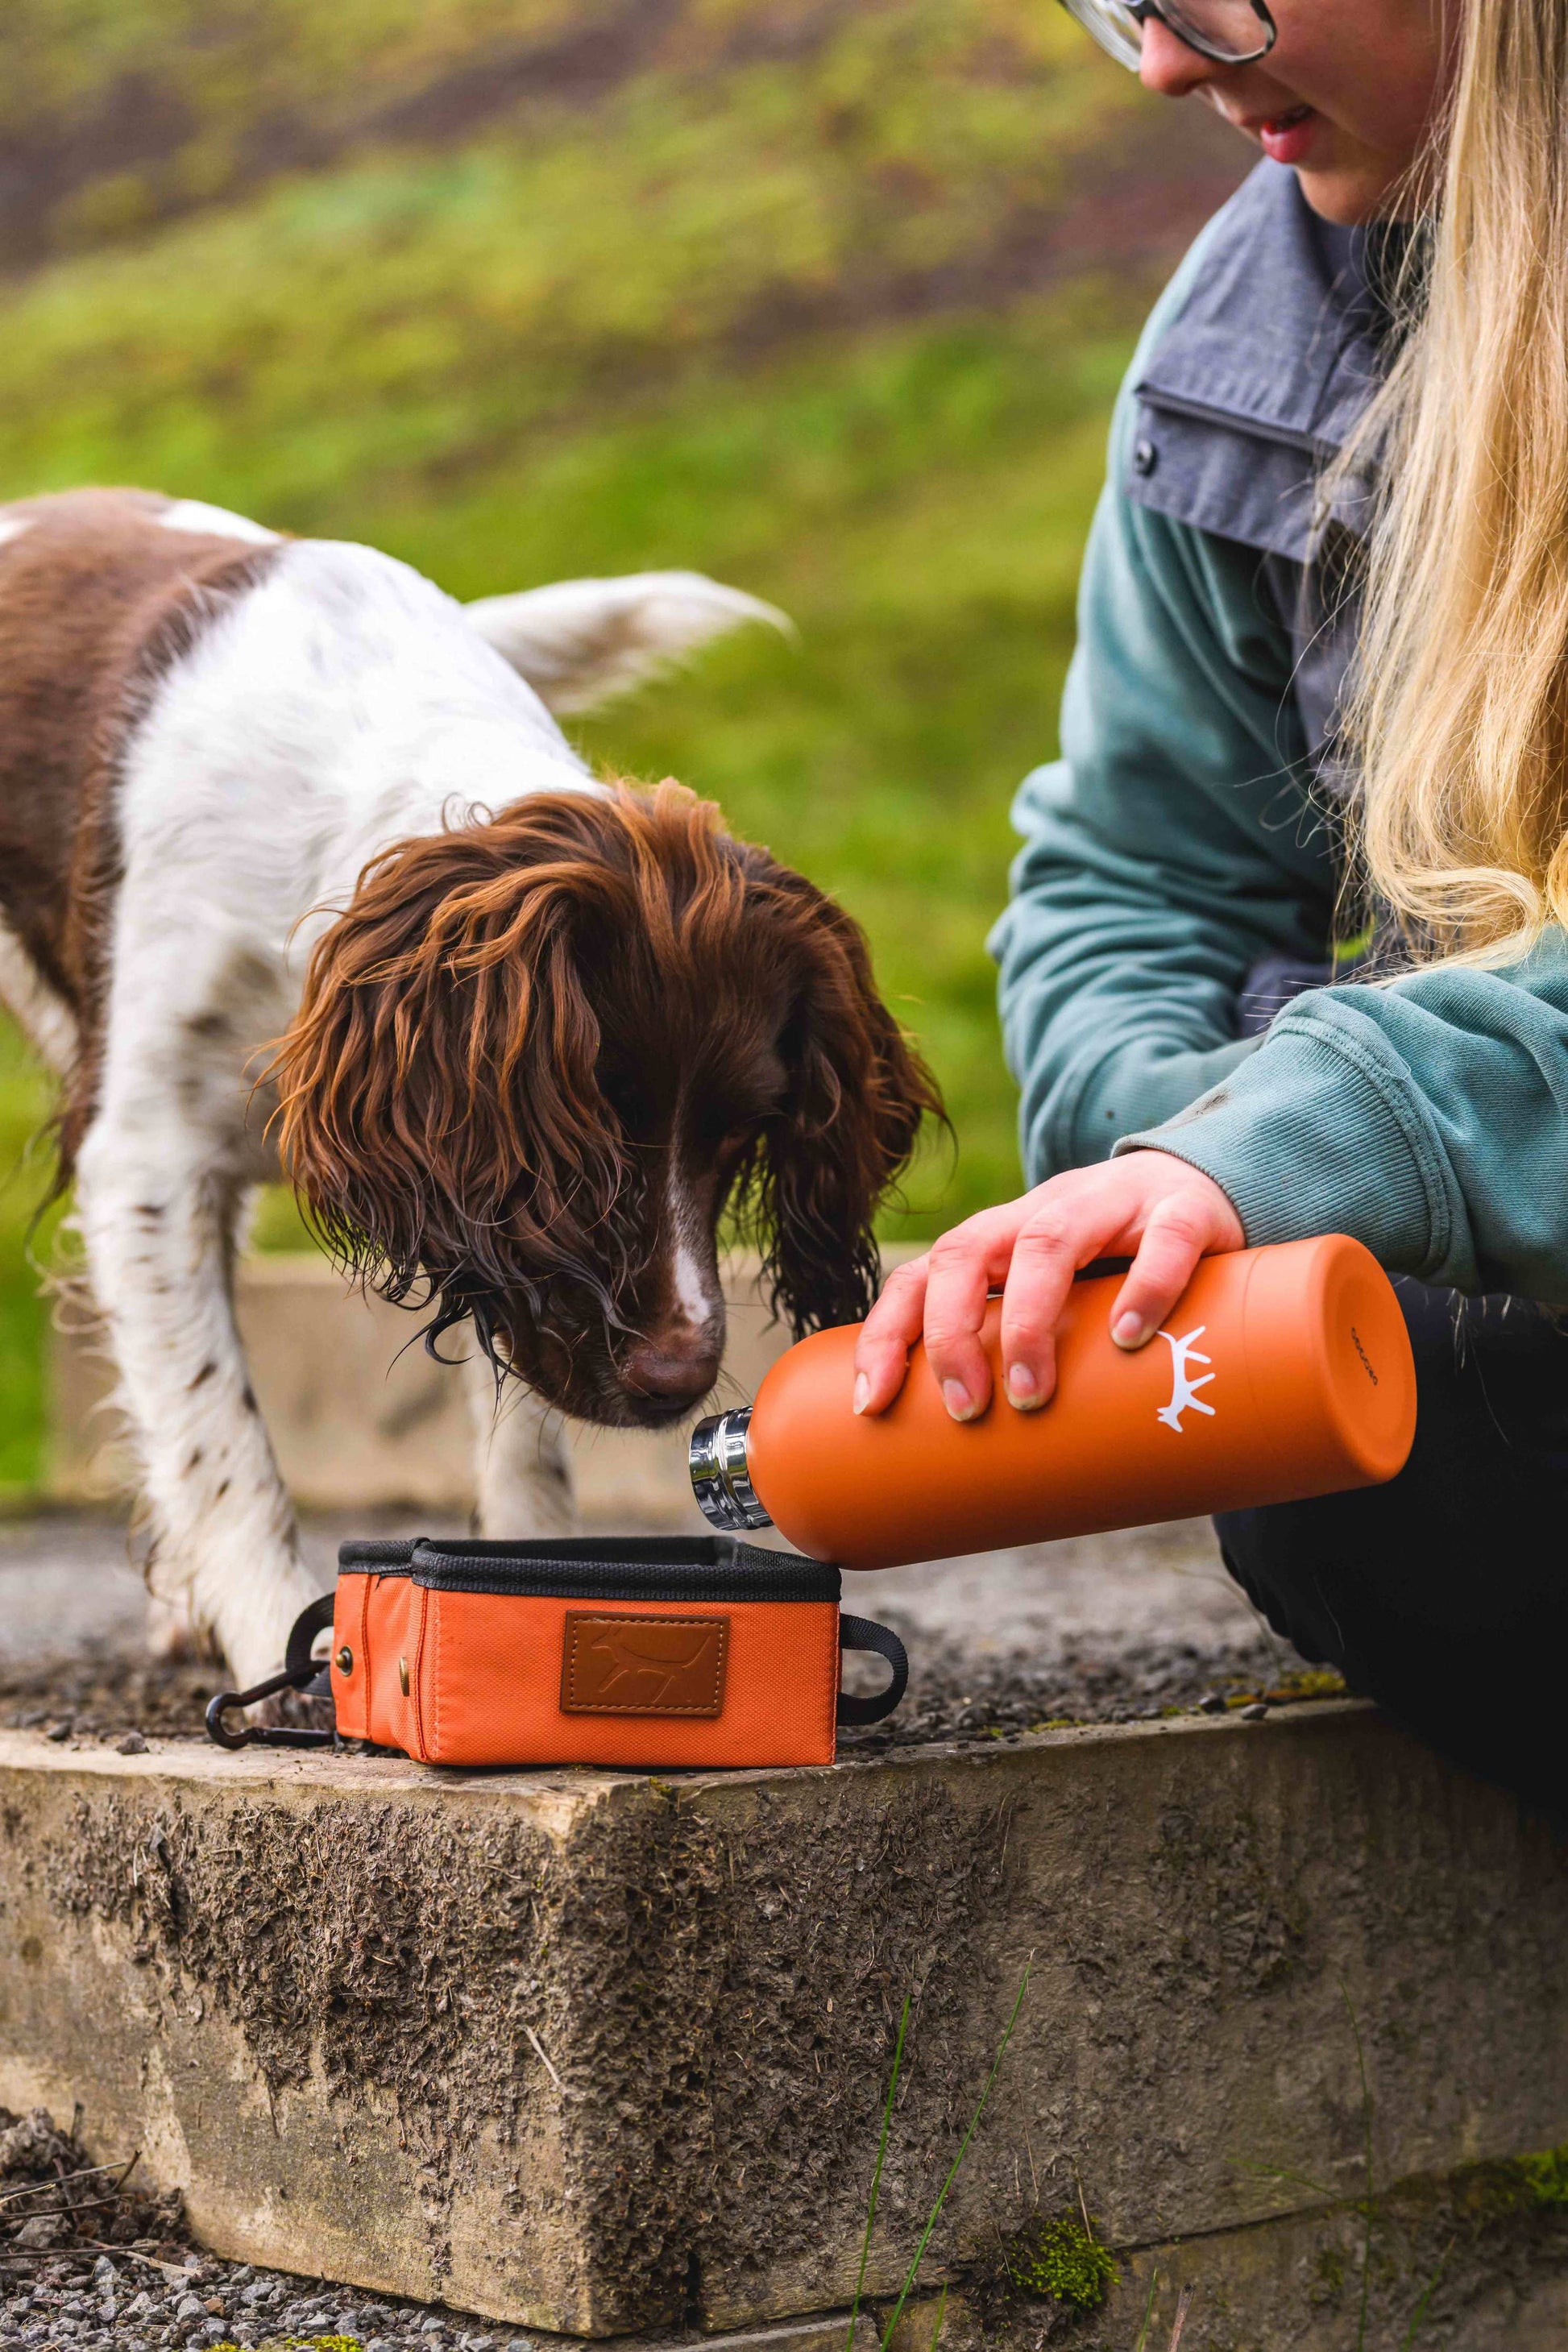 Blond girl pouring water from a rust Droggo water bottle into a rust Droggo travel bowl while spaniel dog watches and wait excitedly